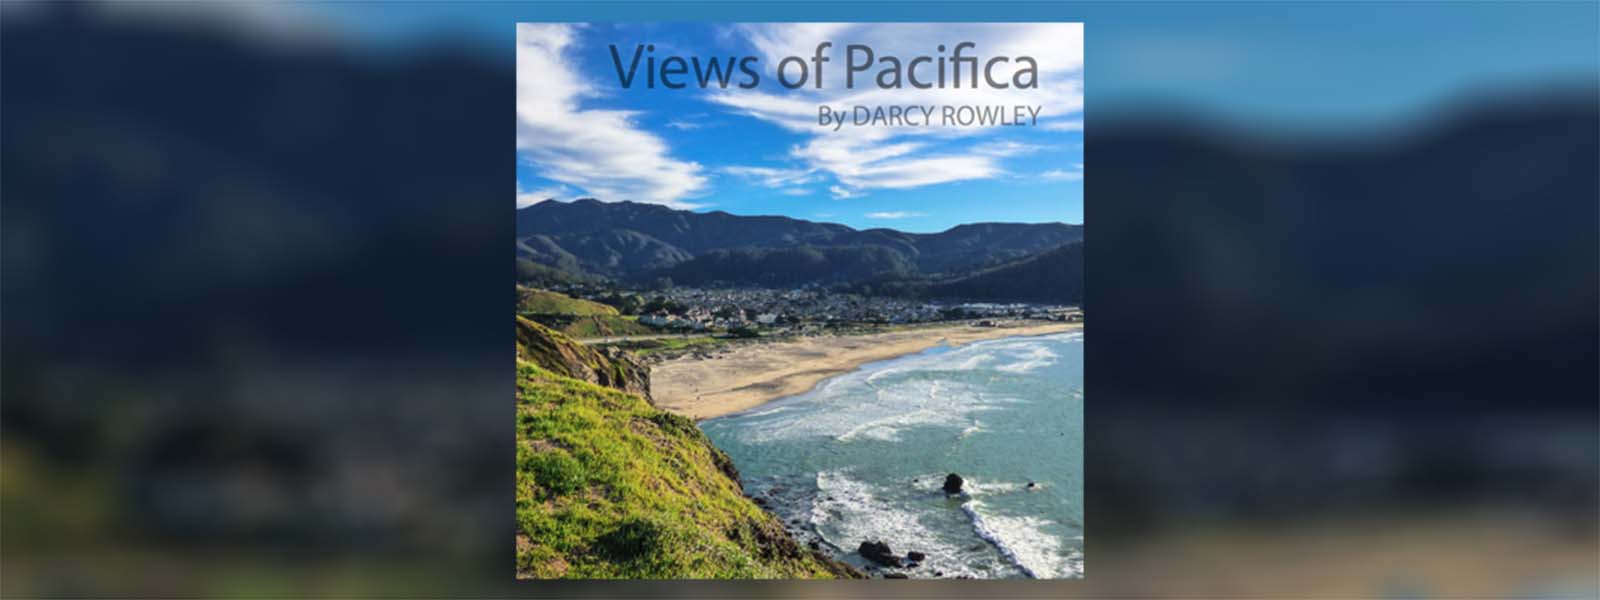 Views of Pacifica – Photo book by Darcy Rowley